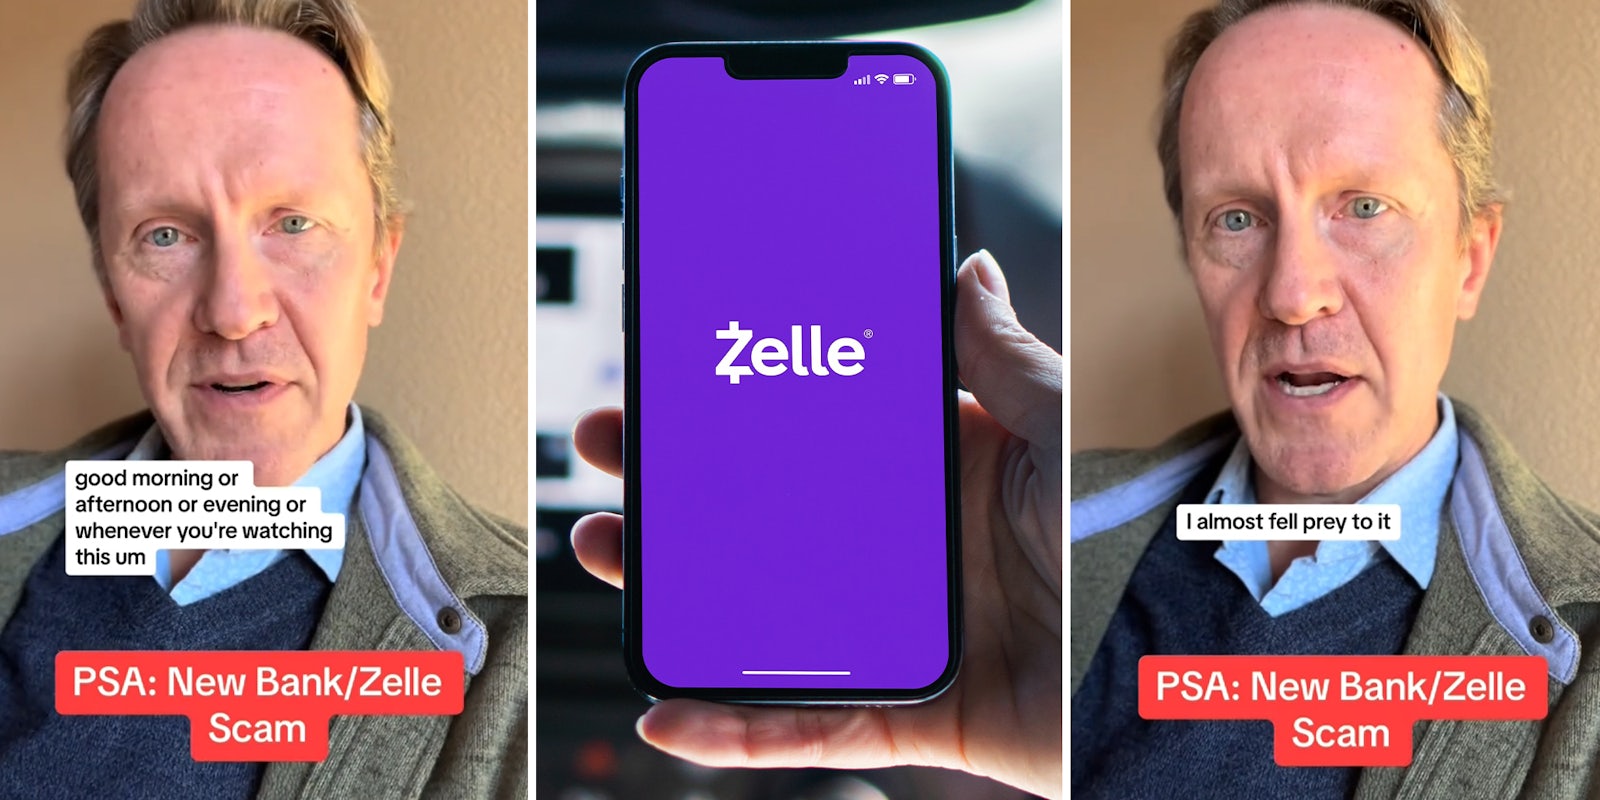 Bank of America, Chase customer warns of new Zelle scam after almost falling for it himself